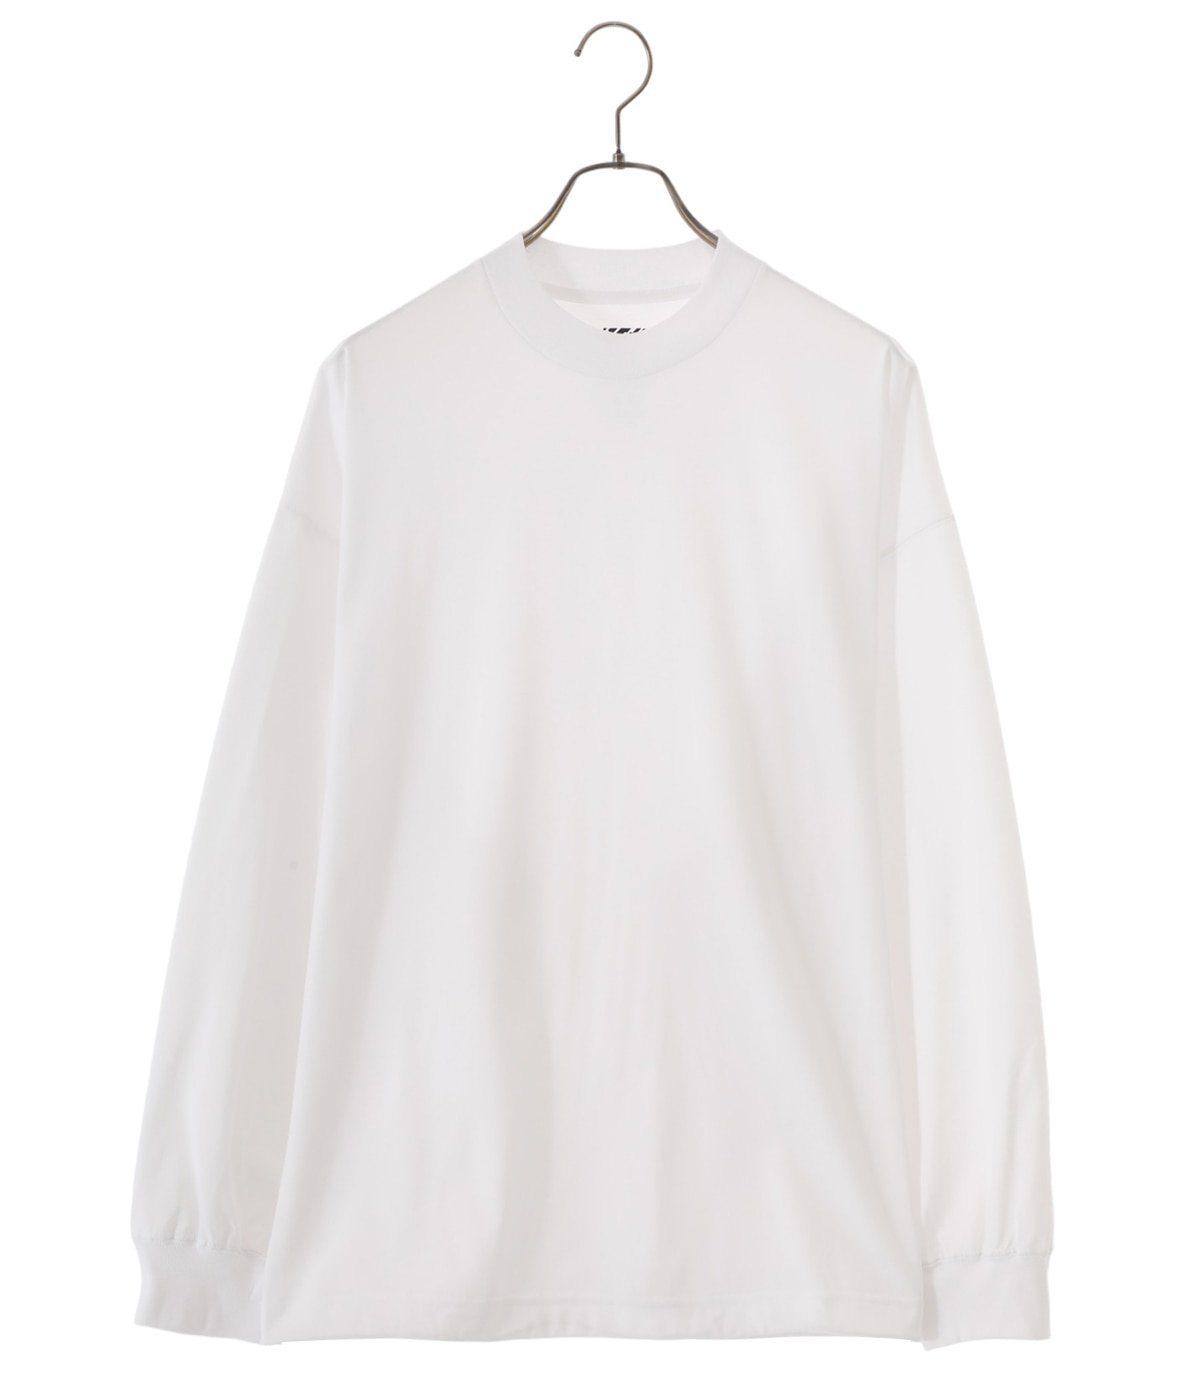 BALLOON LONG T SHIRT | is-ness(イズネス) / トップス カットソー長袖